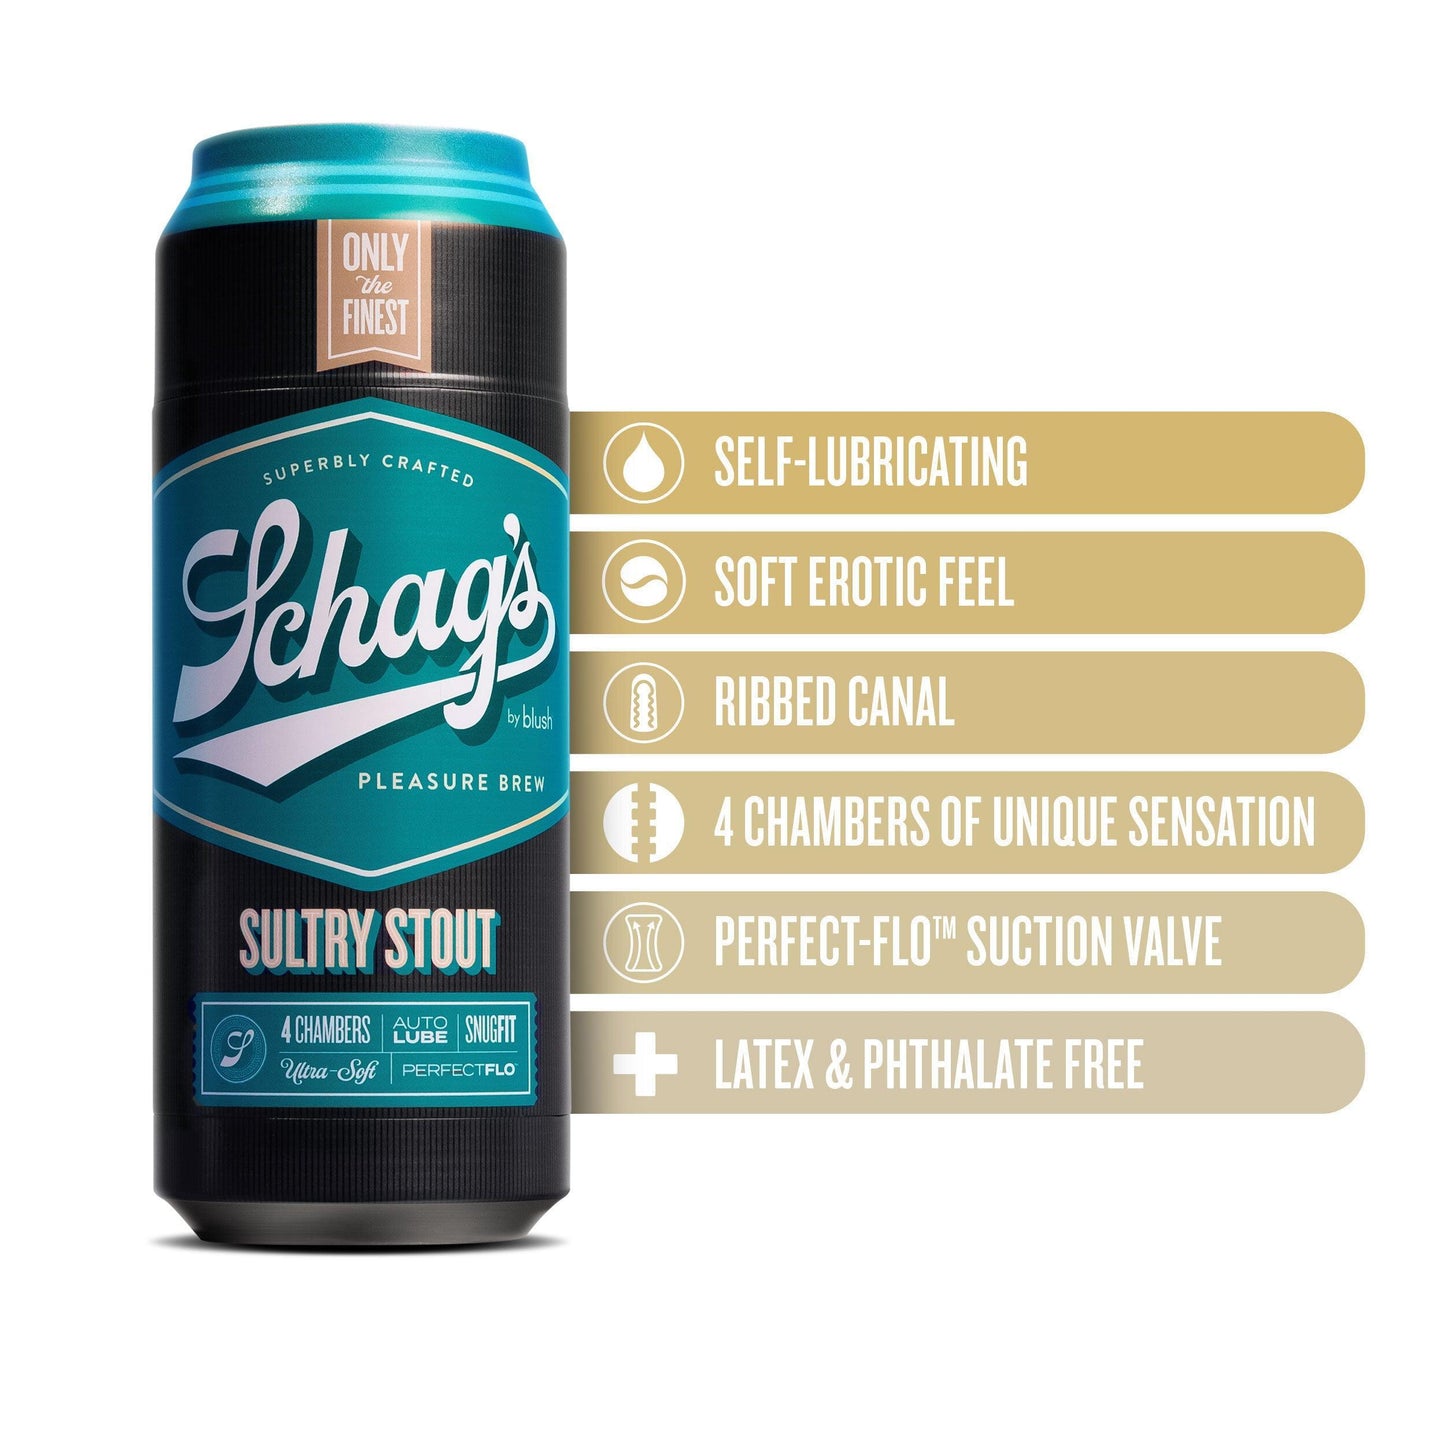 Schag's - Sultry Stout - Frosted - My Sex Toy Hub